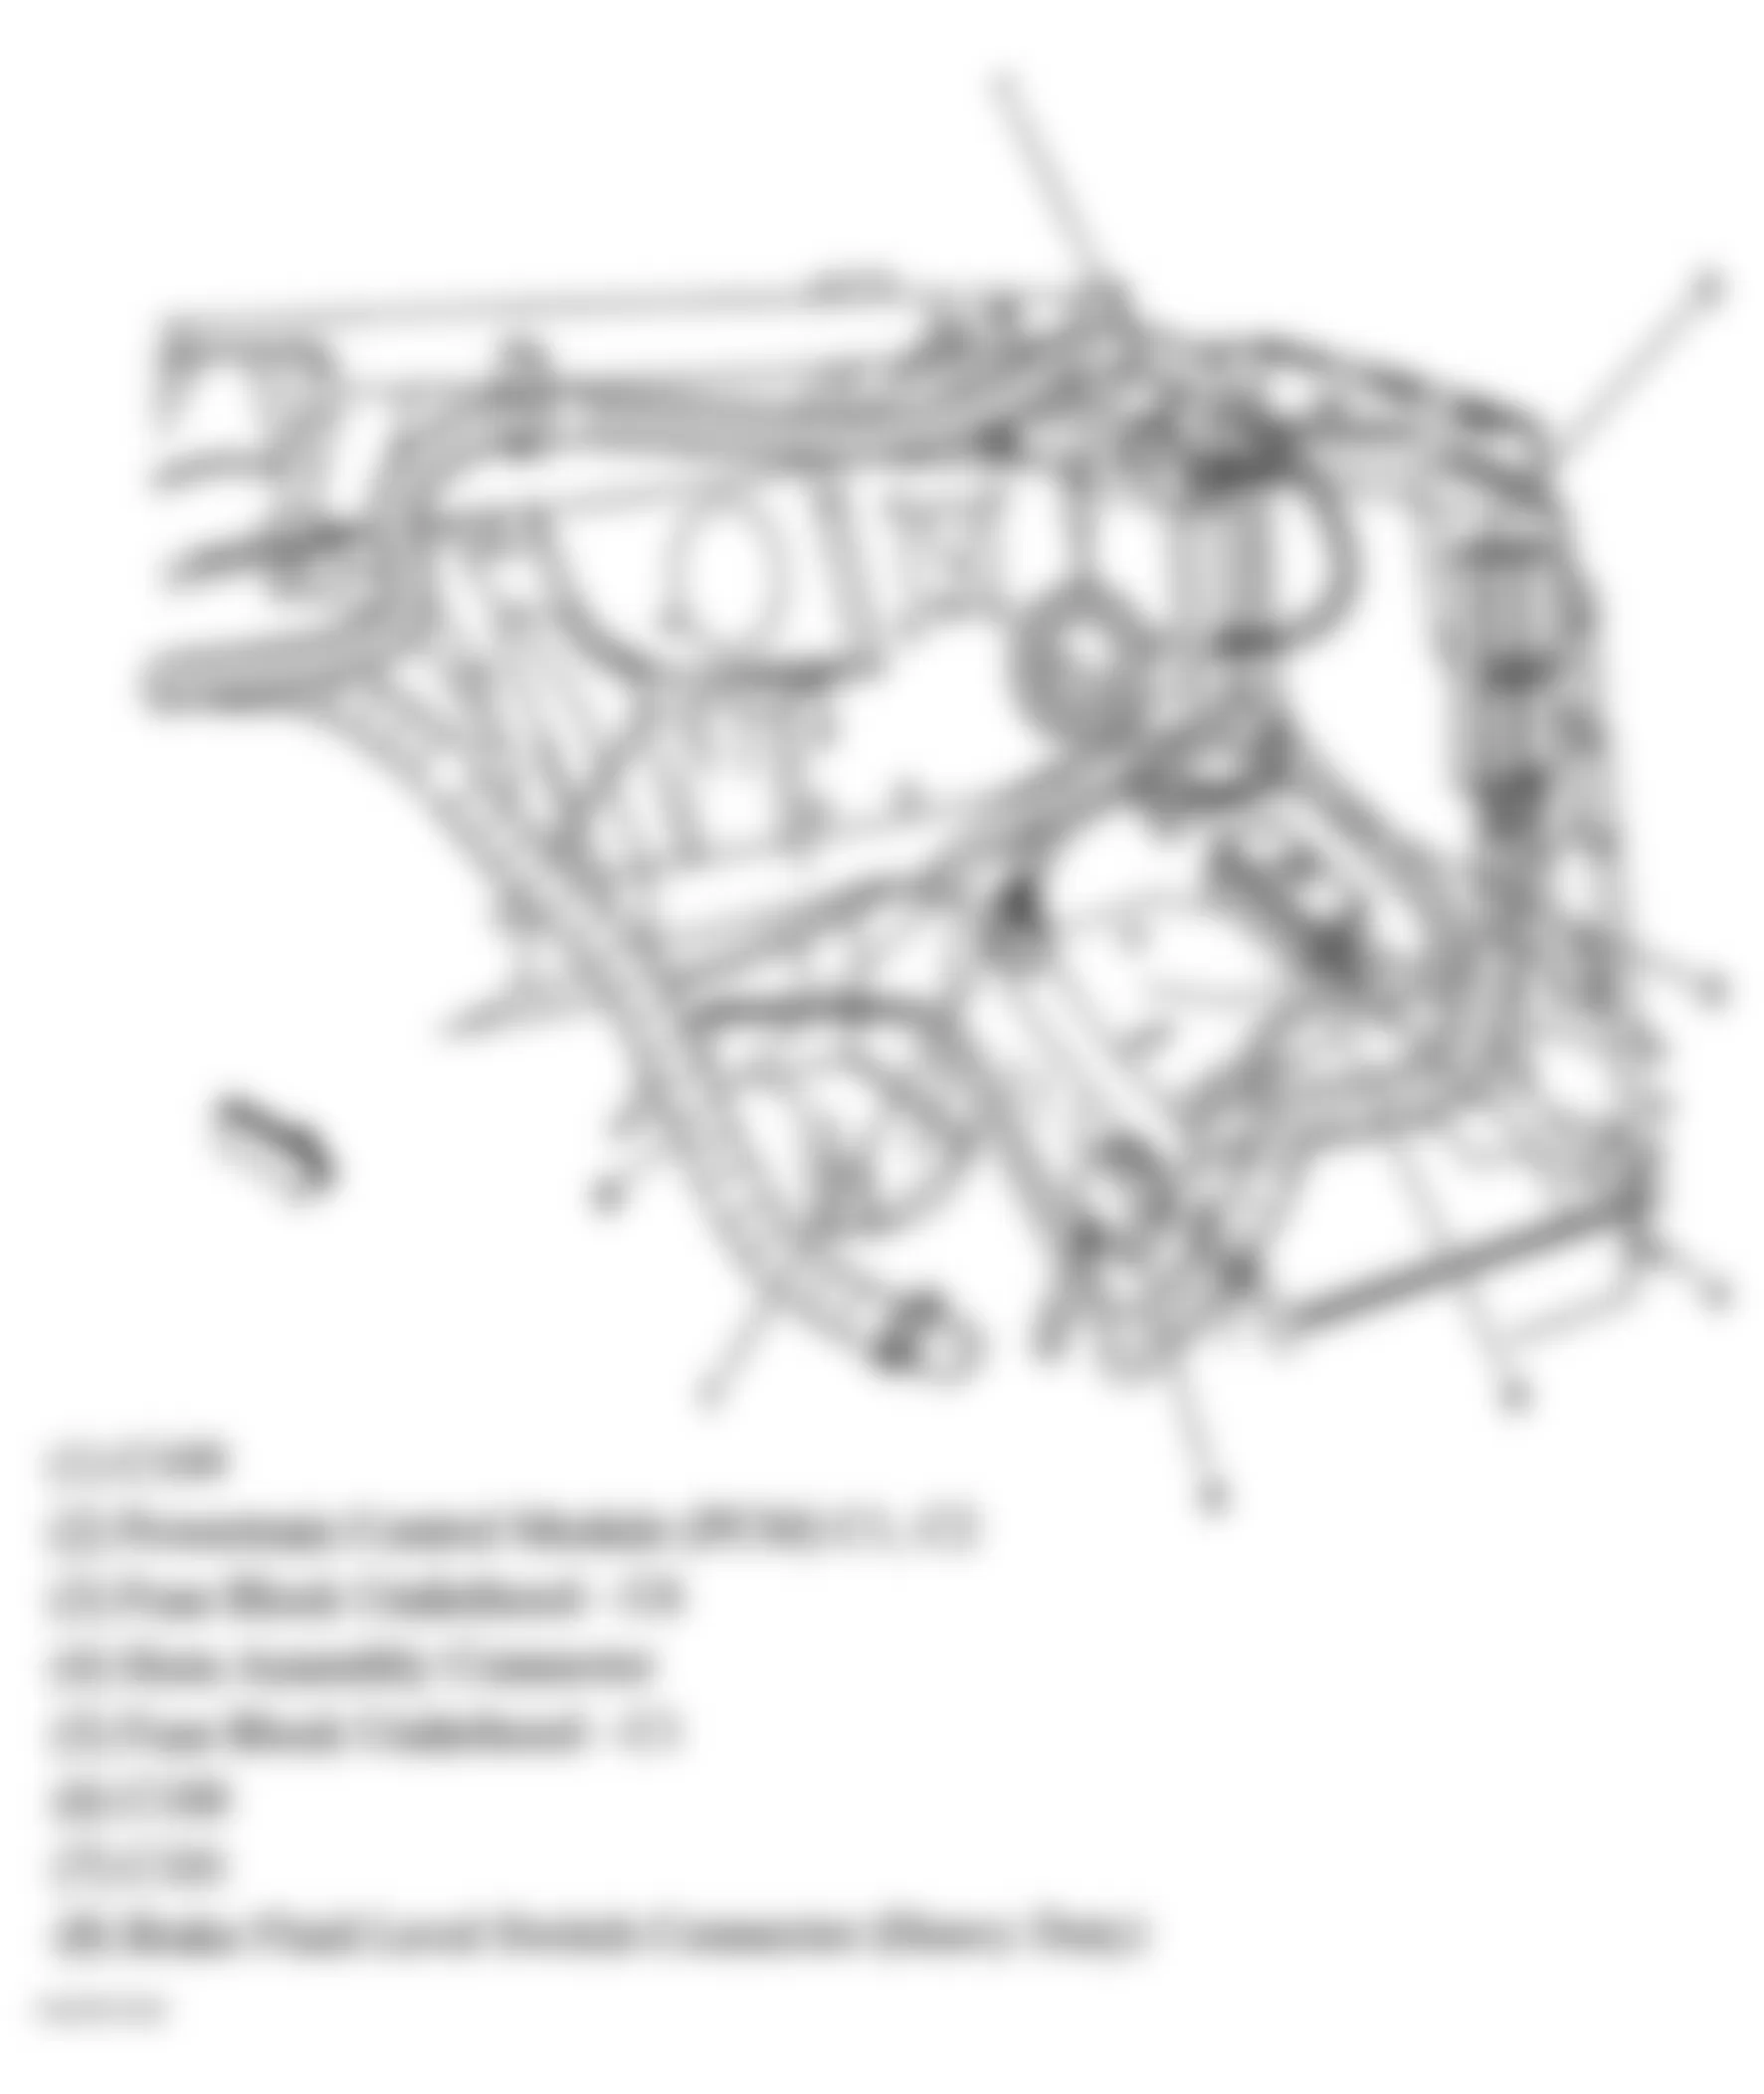 GMC Savana G3500 2004 - Component Locations -  Left Rear Of Engine Compartment